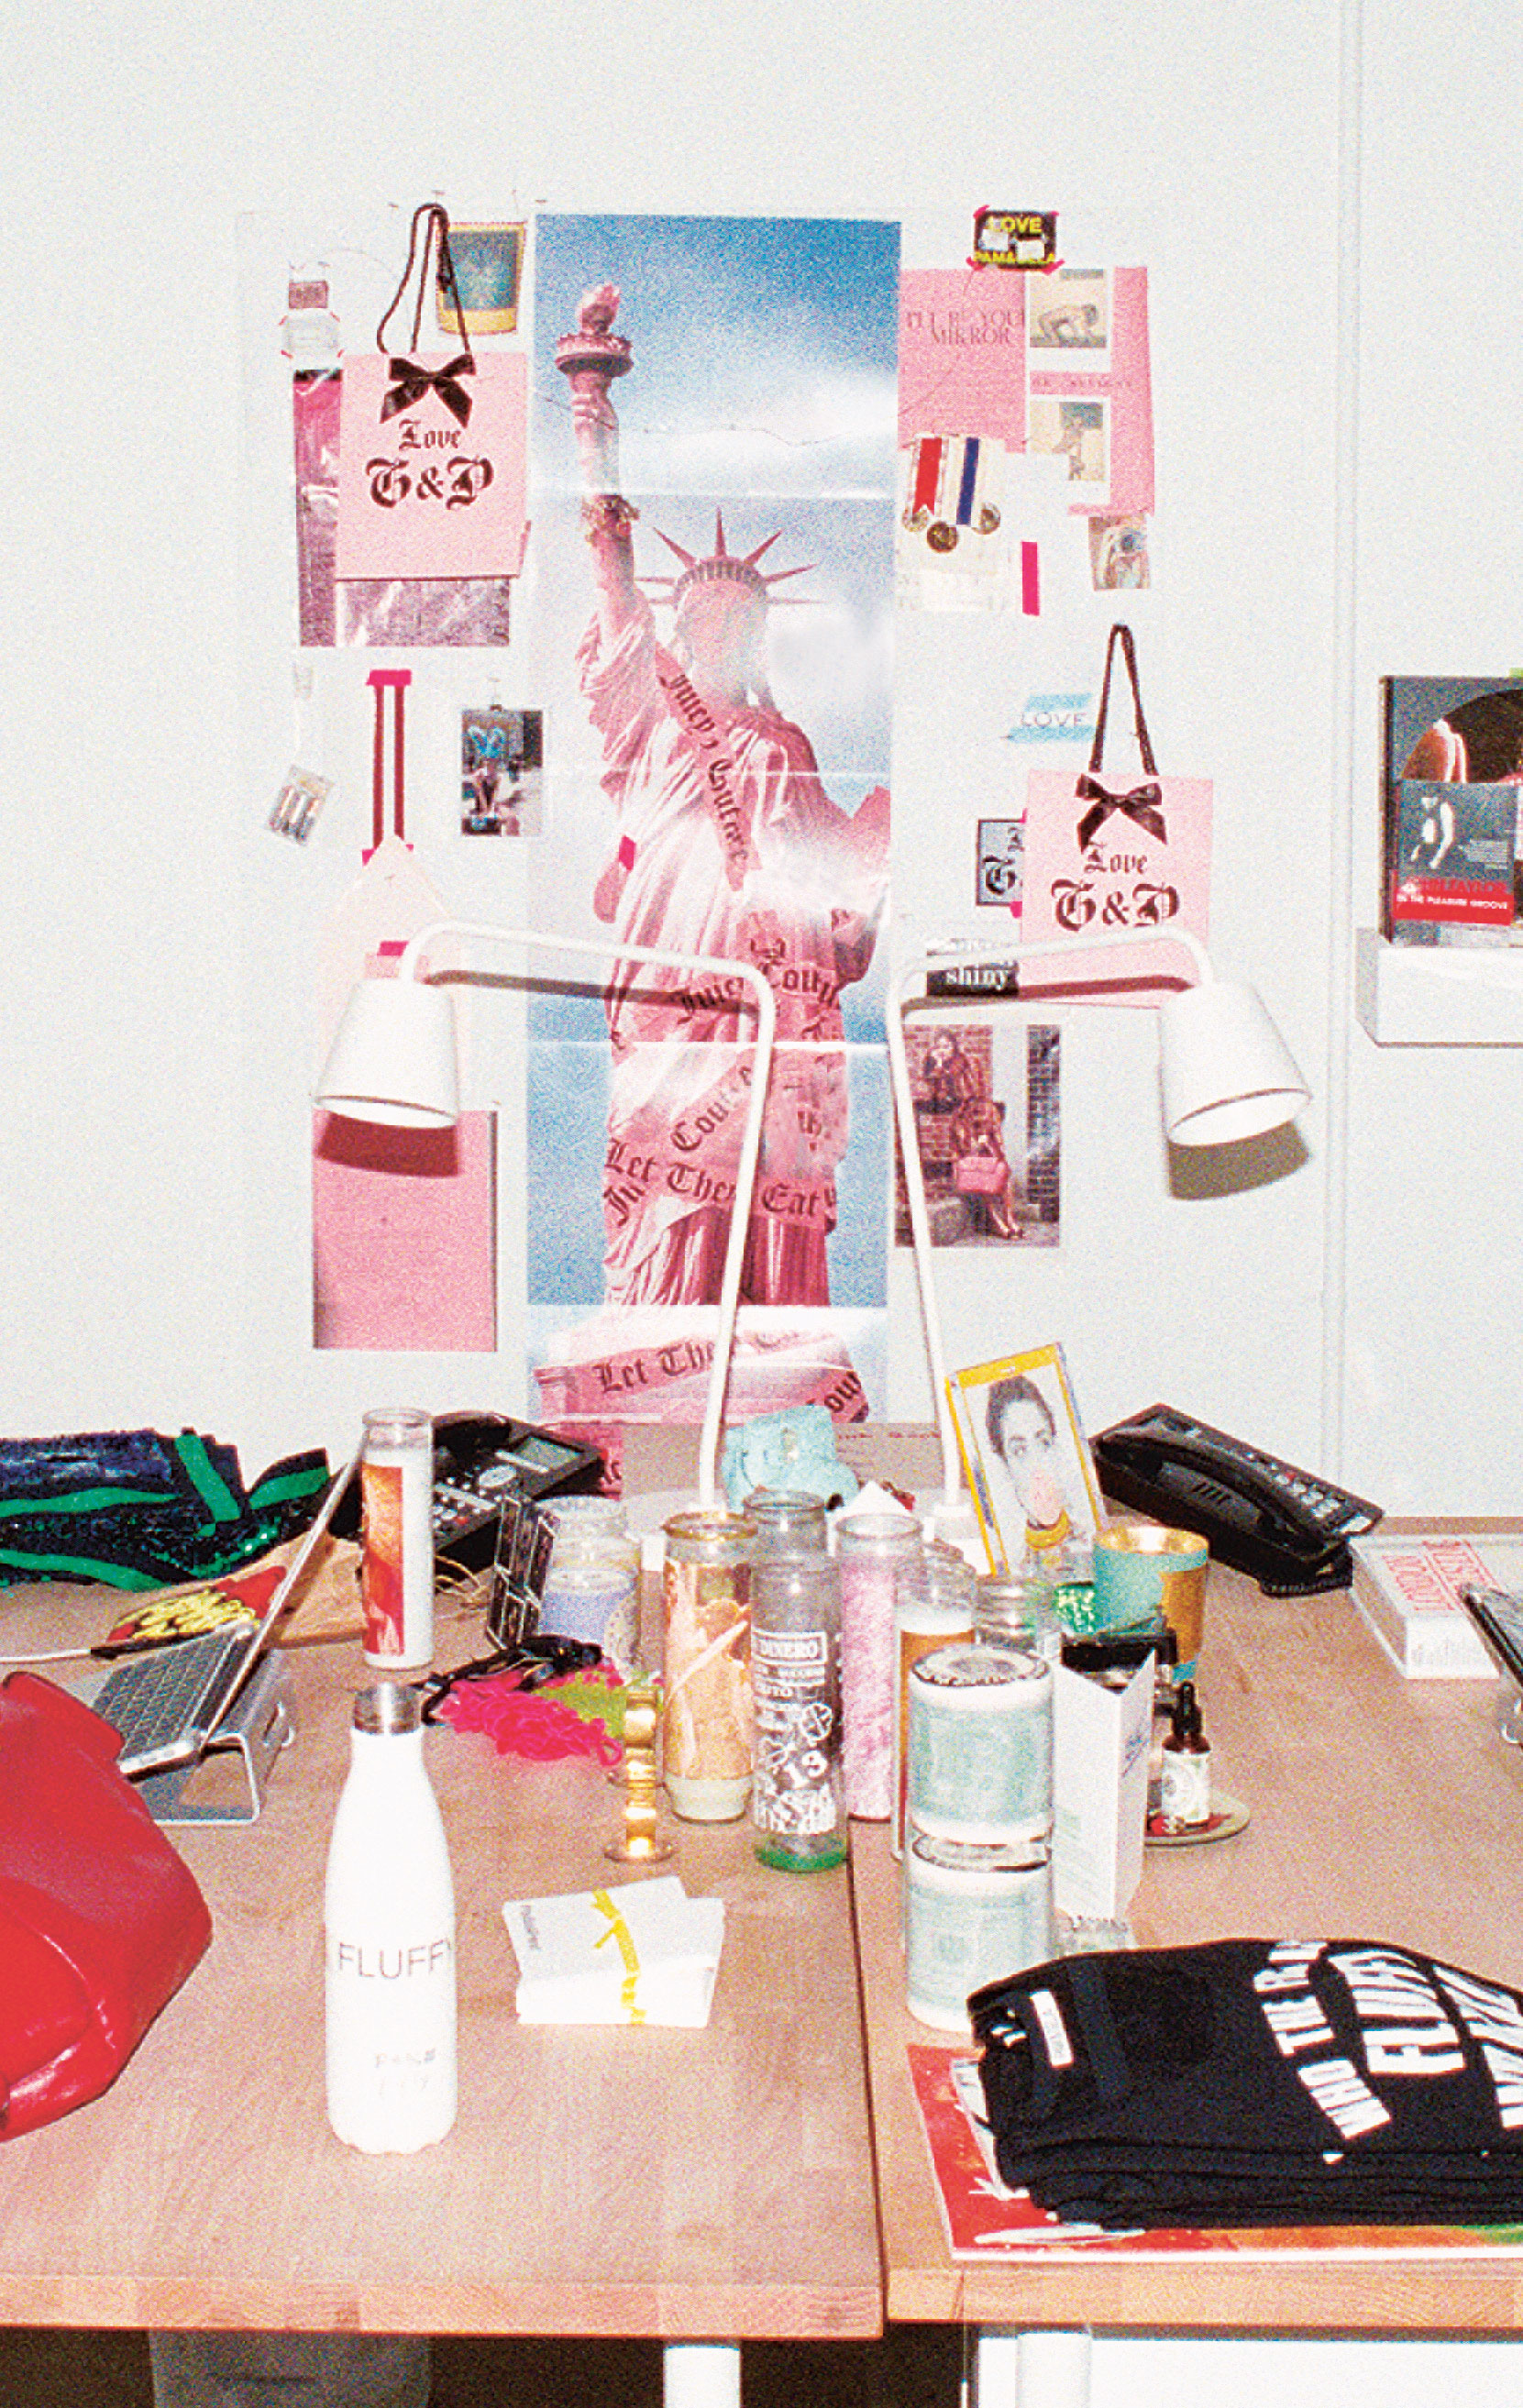 Inside Pam and Gela’s colorful studio. Photograph by Cameron McCool. From Fashion in LA